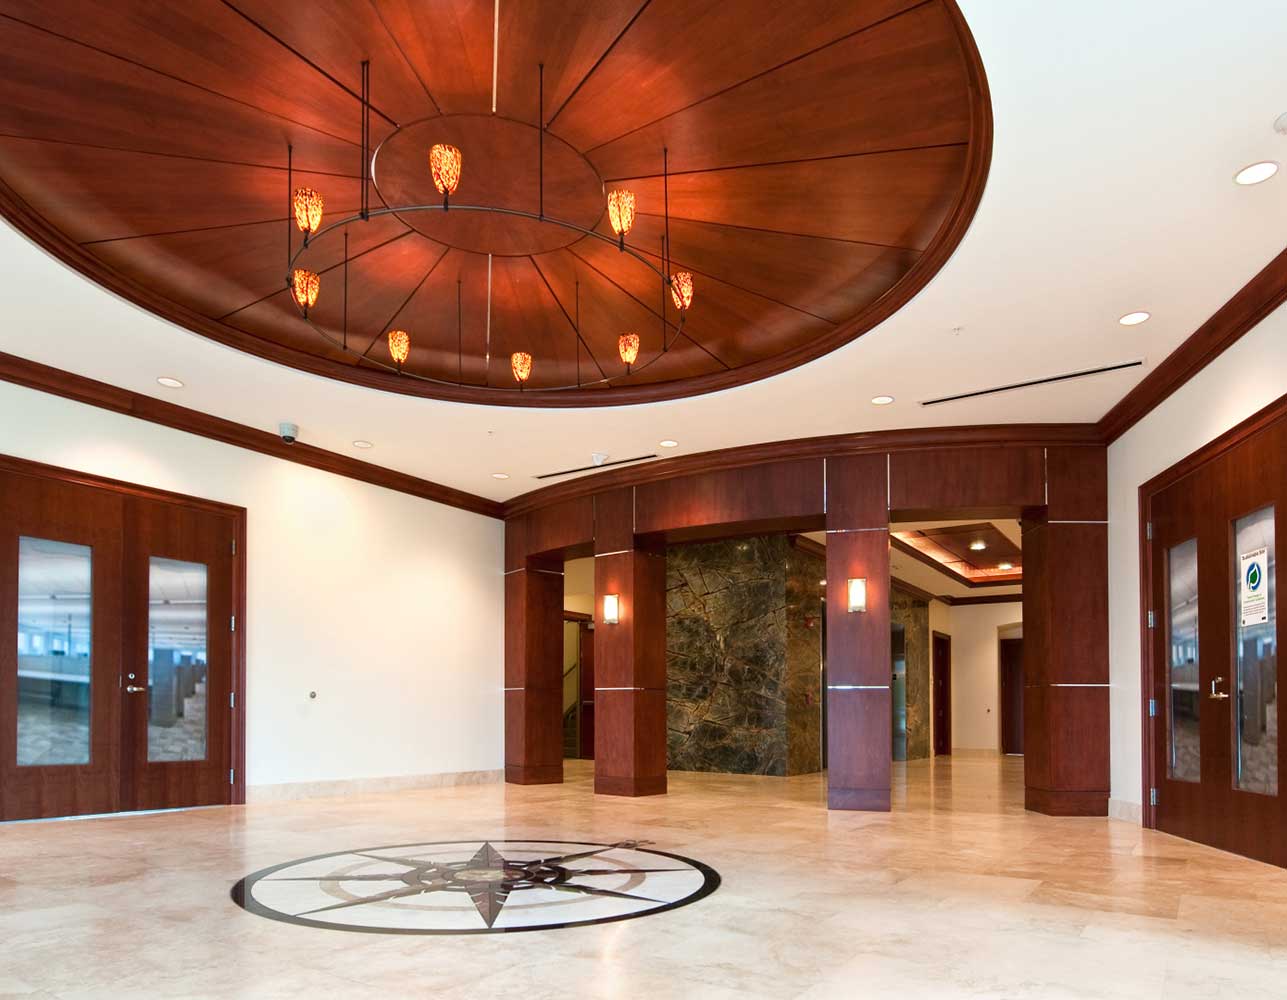 Lobby of BRPH building with brown wood columns and beige flooring